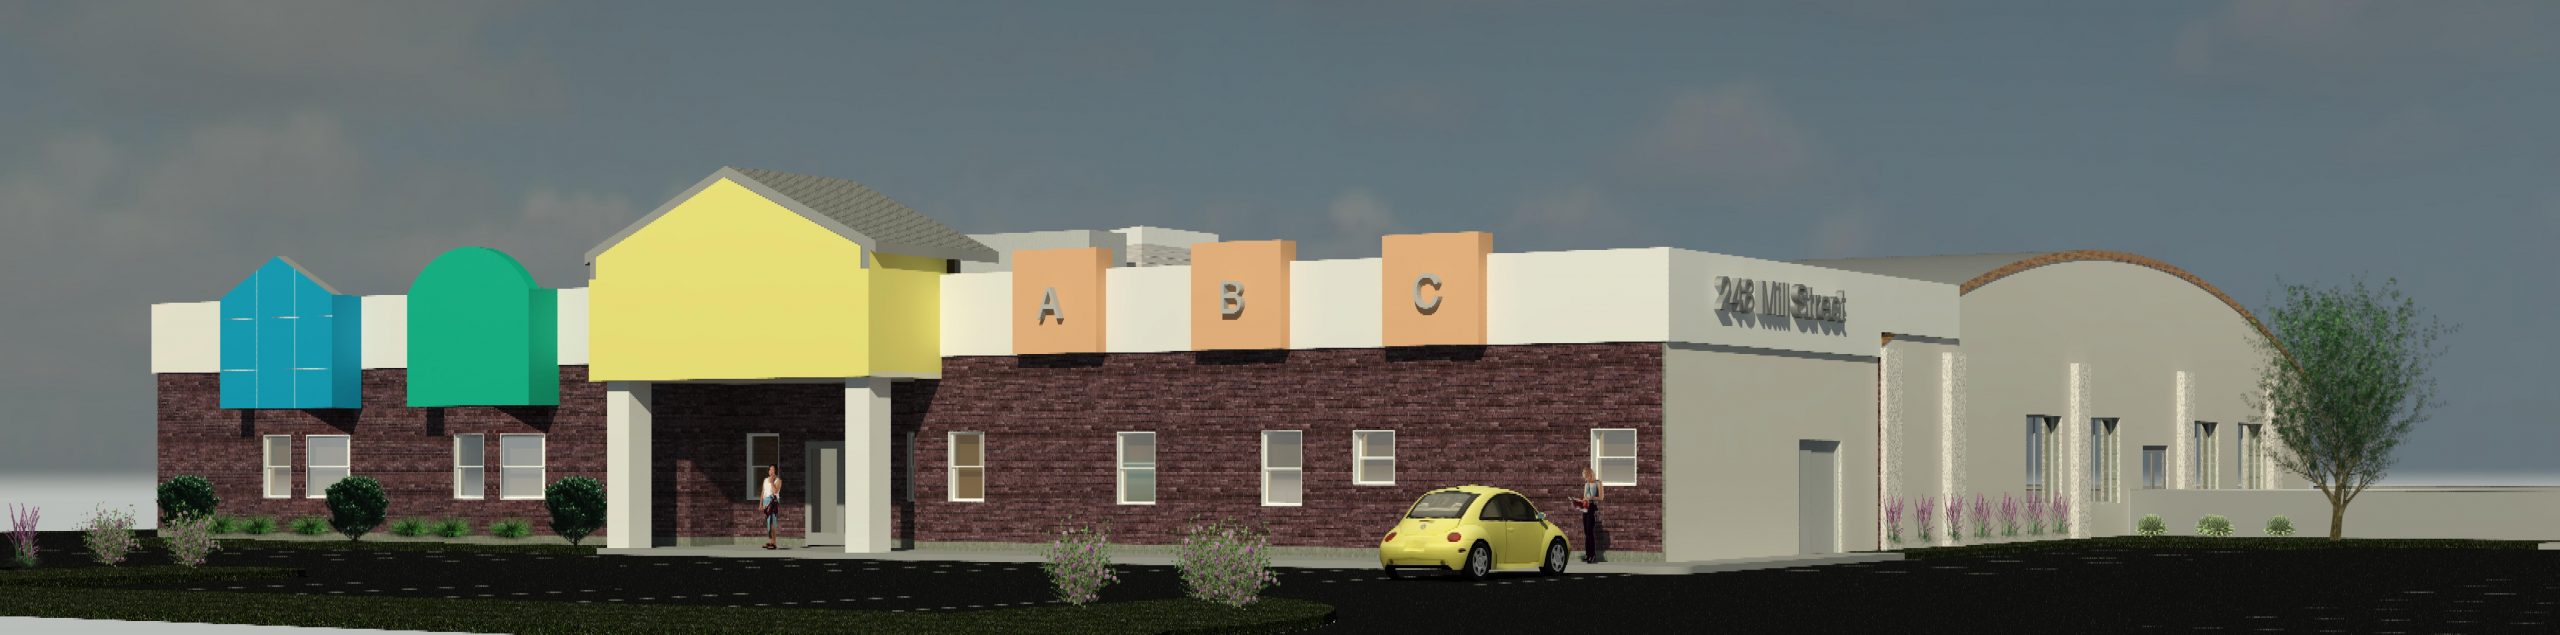 Rendering of new childcare center building